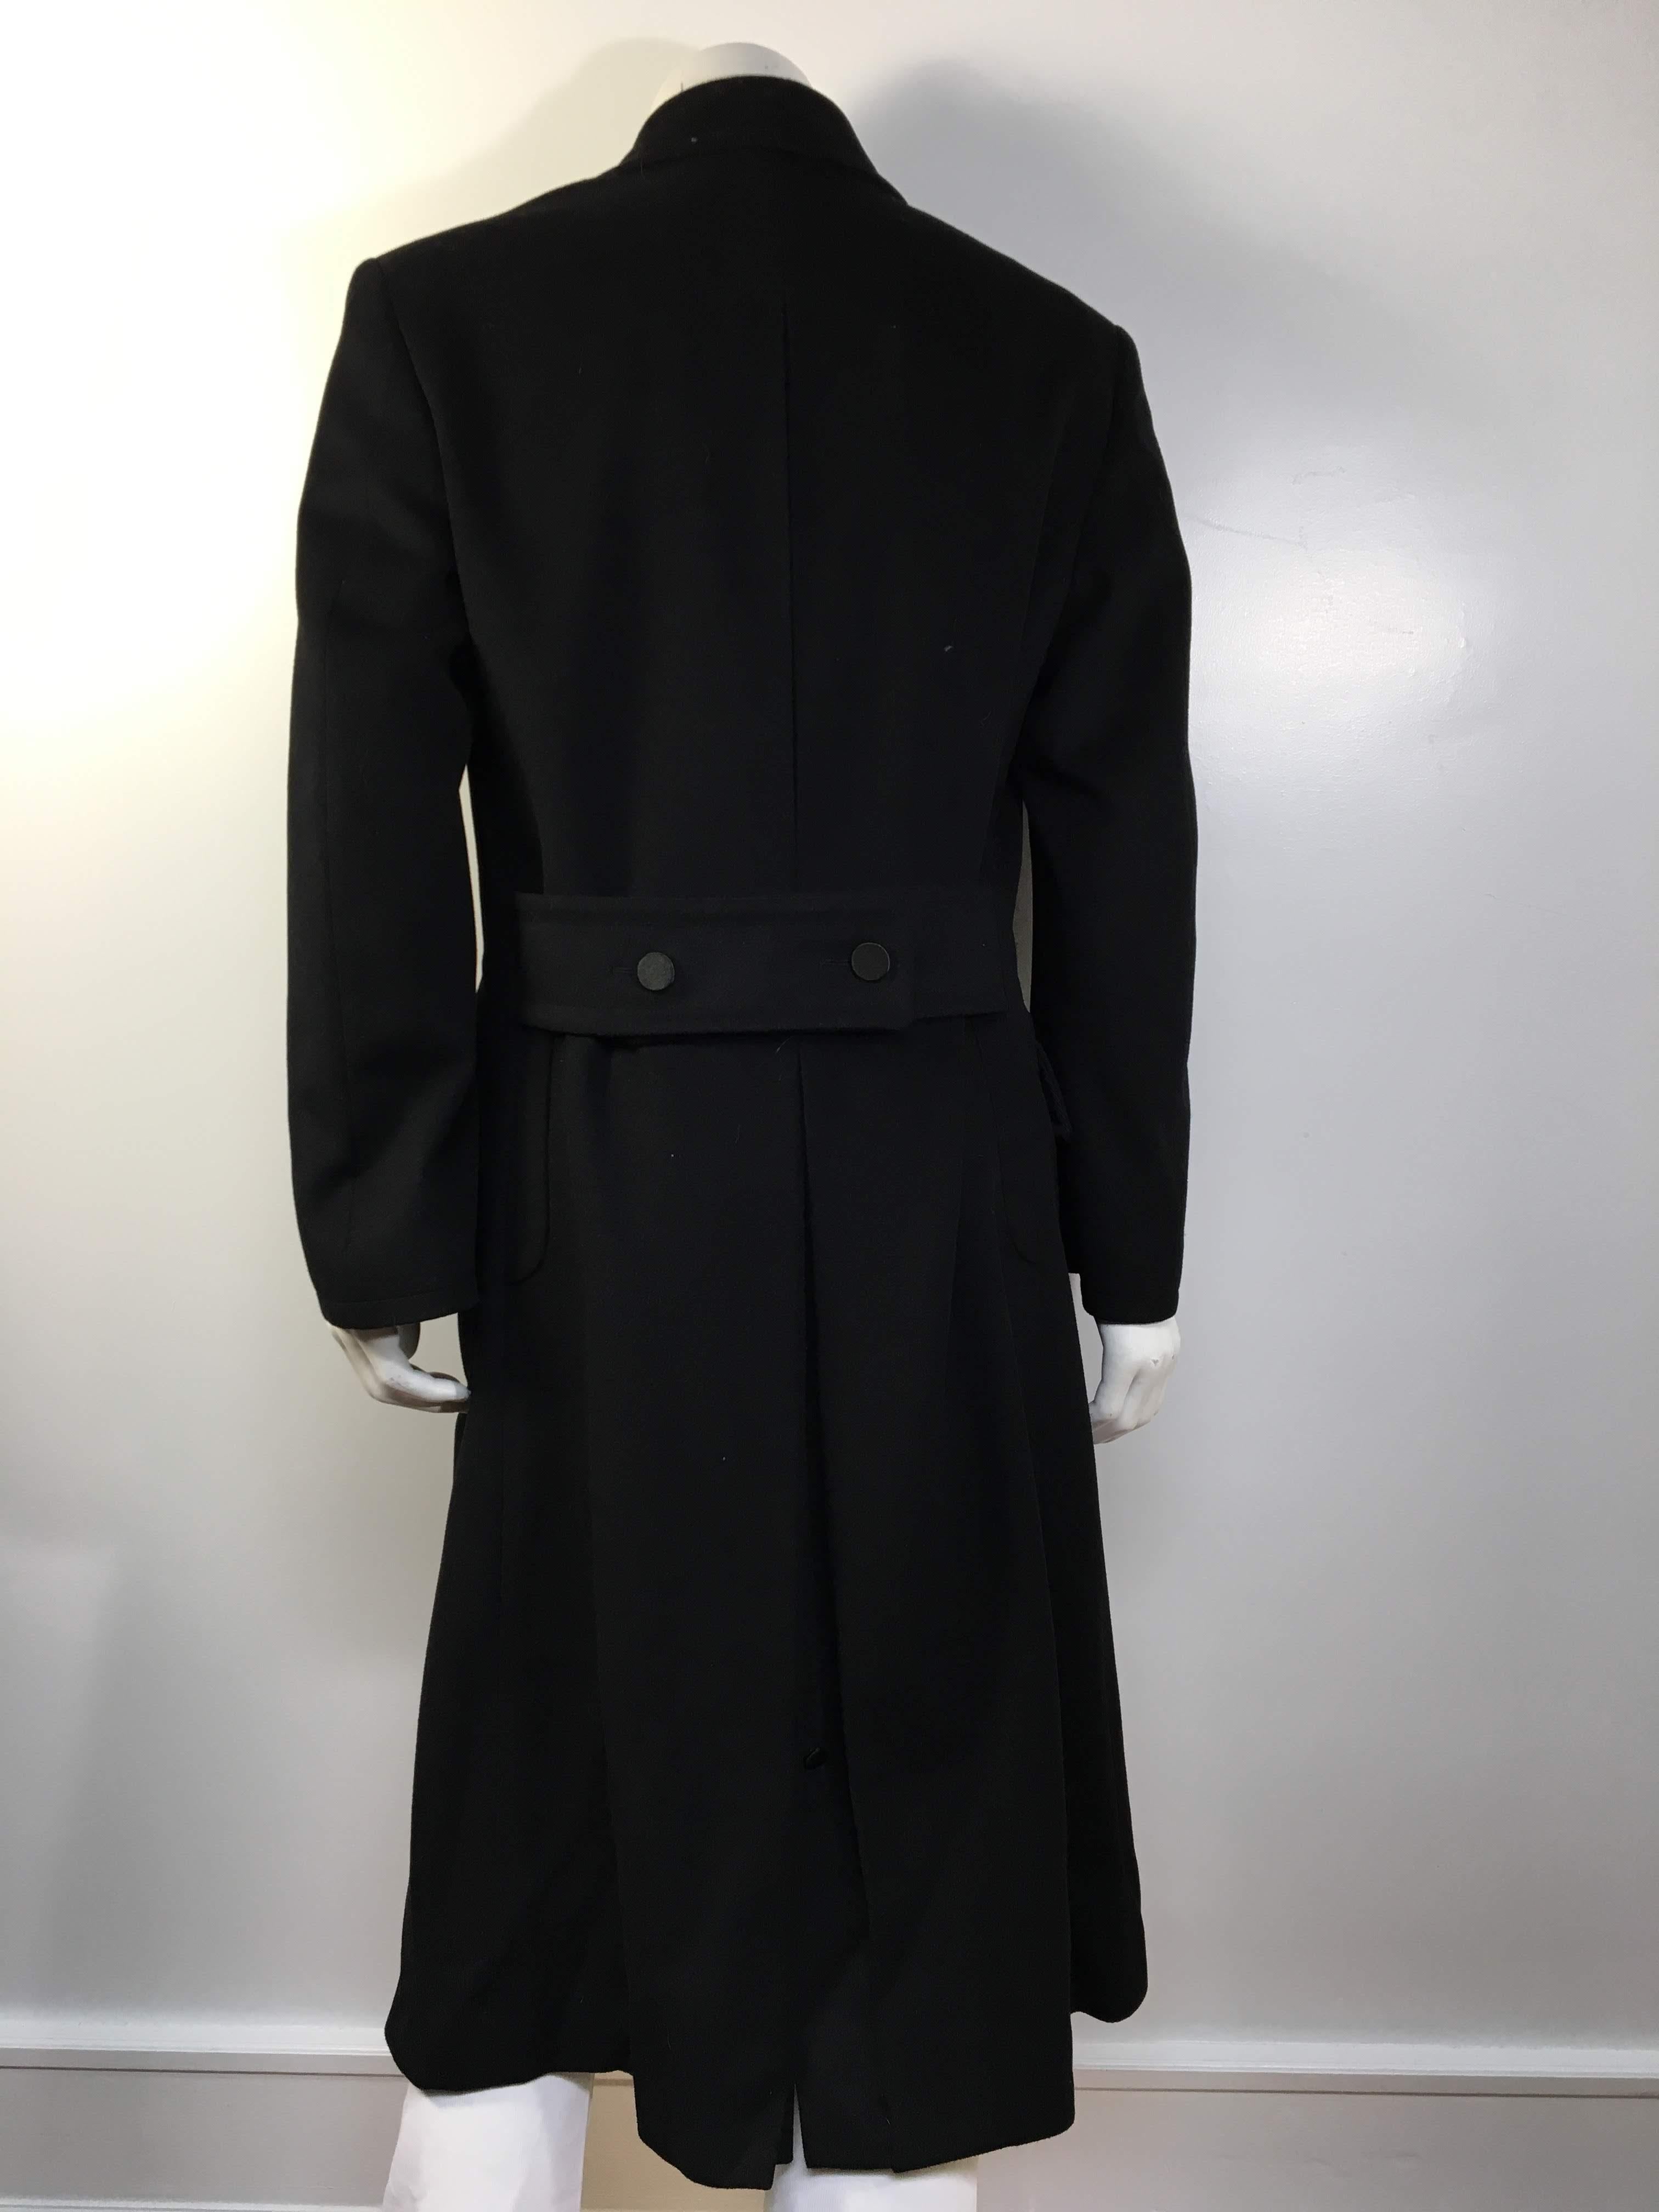 Men's Gucci Black Wool & Cashmere Trench Coat 1